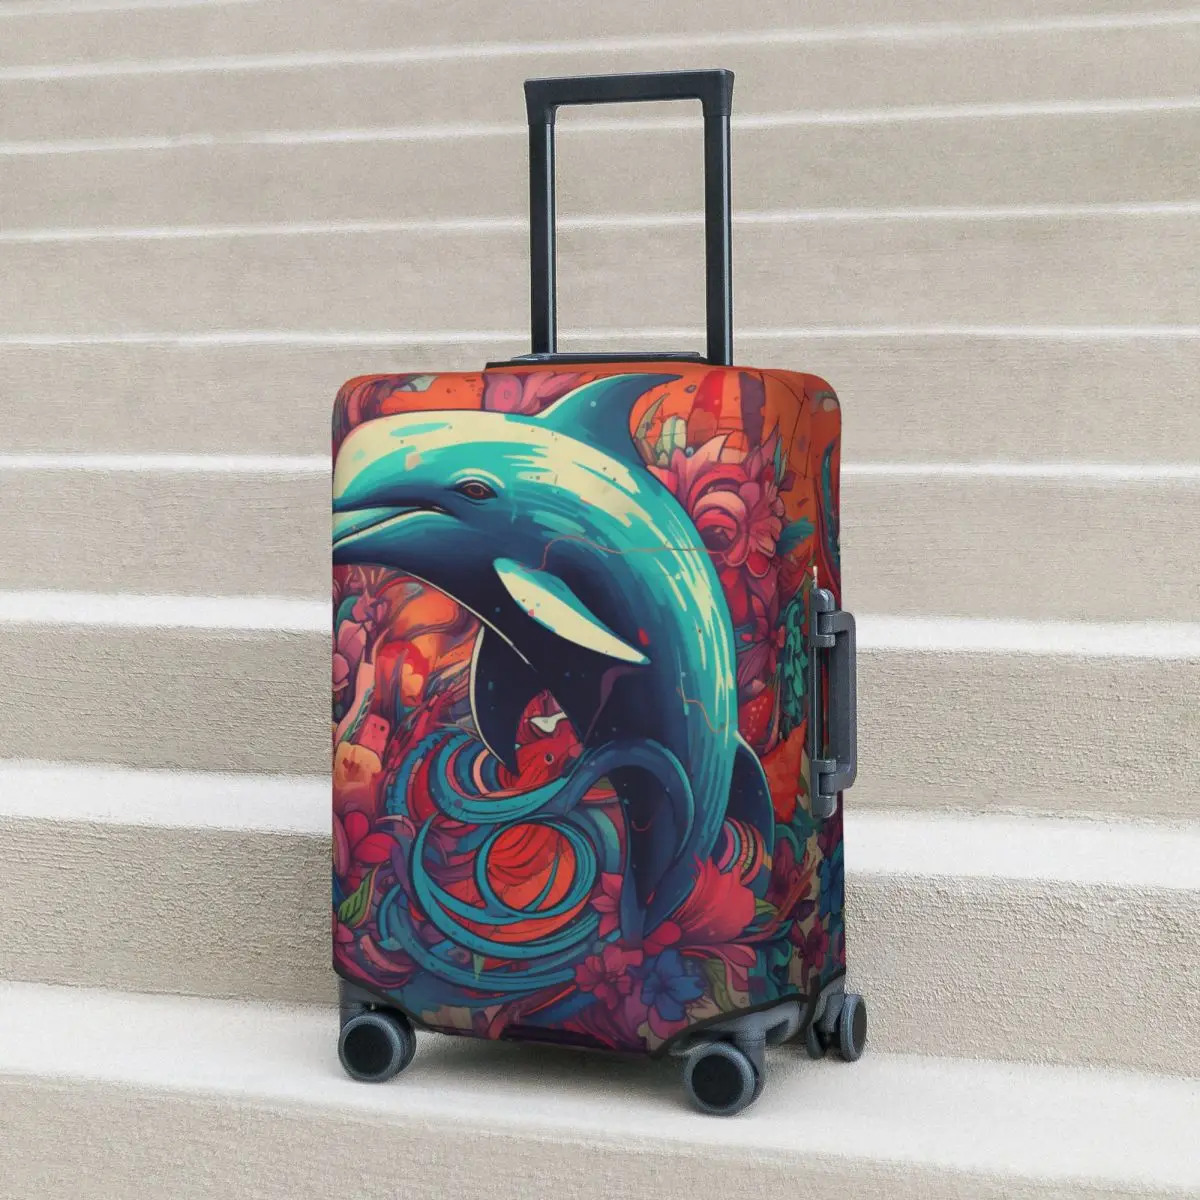 

Dolphin Suitcase Cover Wall Graffiti Various Styles Elastic Business Protector Luggage Accesories Vacation